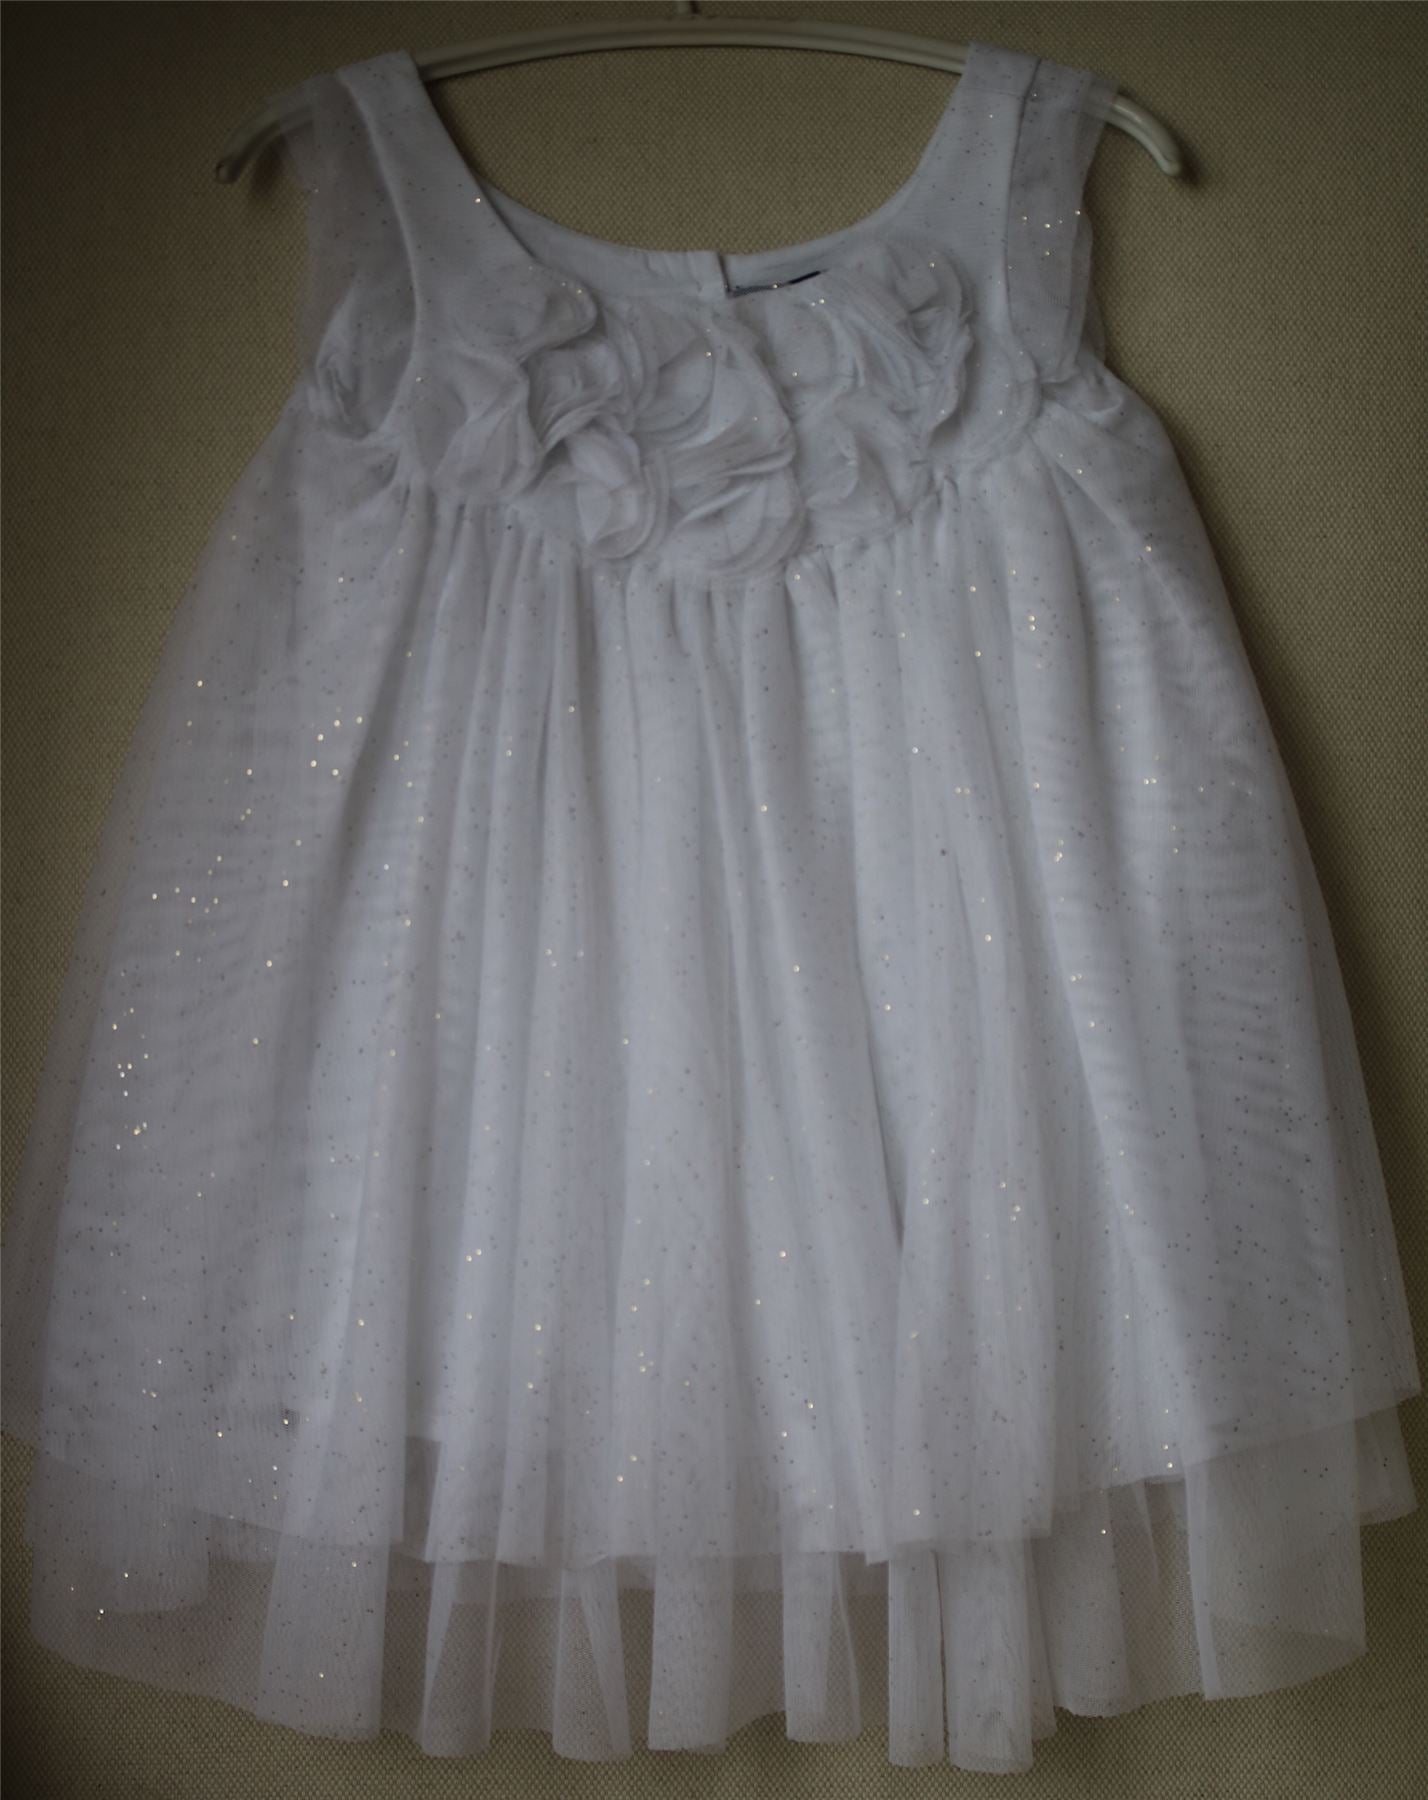 LILI GAUFRETTE GIRLS WHITE TULLE DRESS WITH GOLD GLITTER 2 YEARS